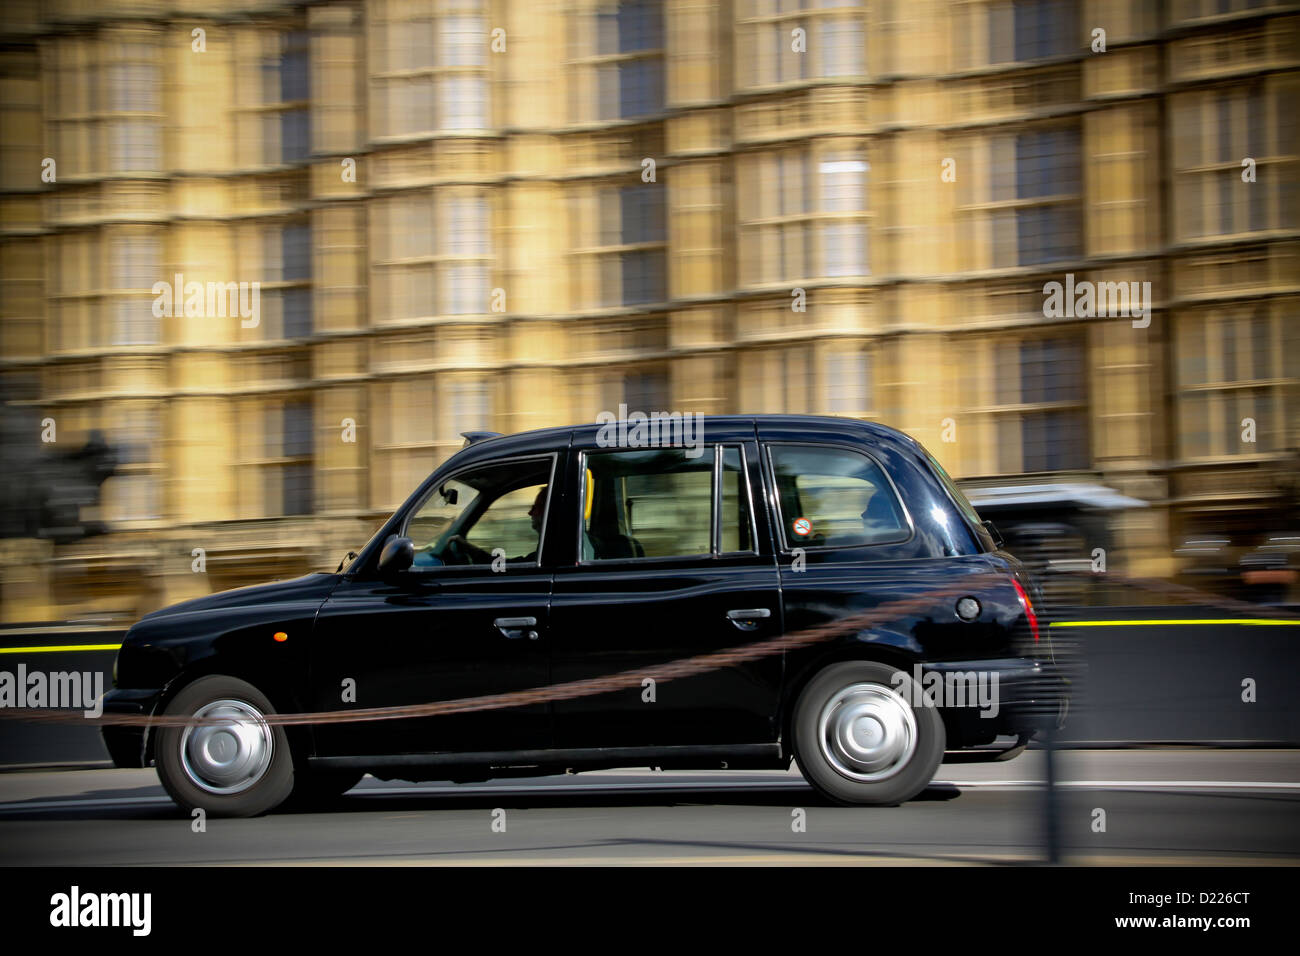 Black taxi cab passing Palace of Westminster London concept image Stock Photo